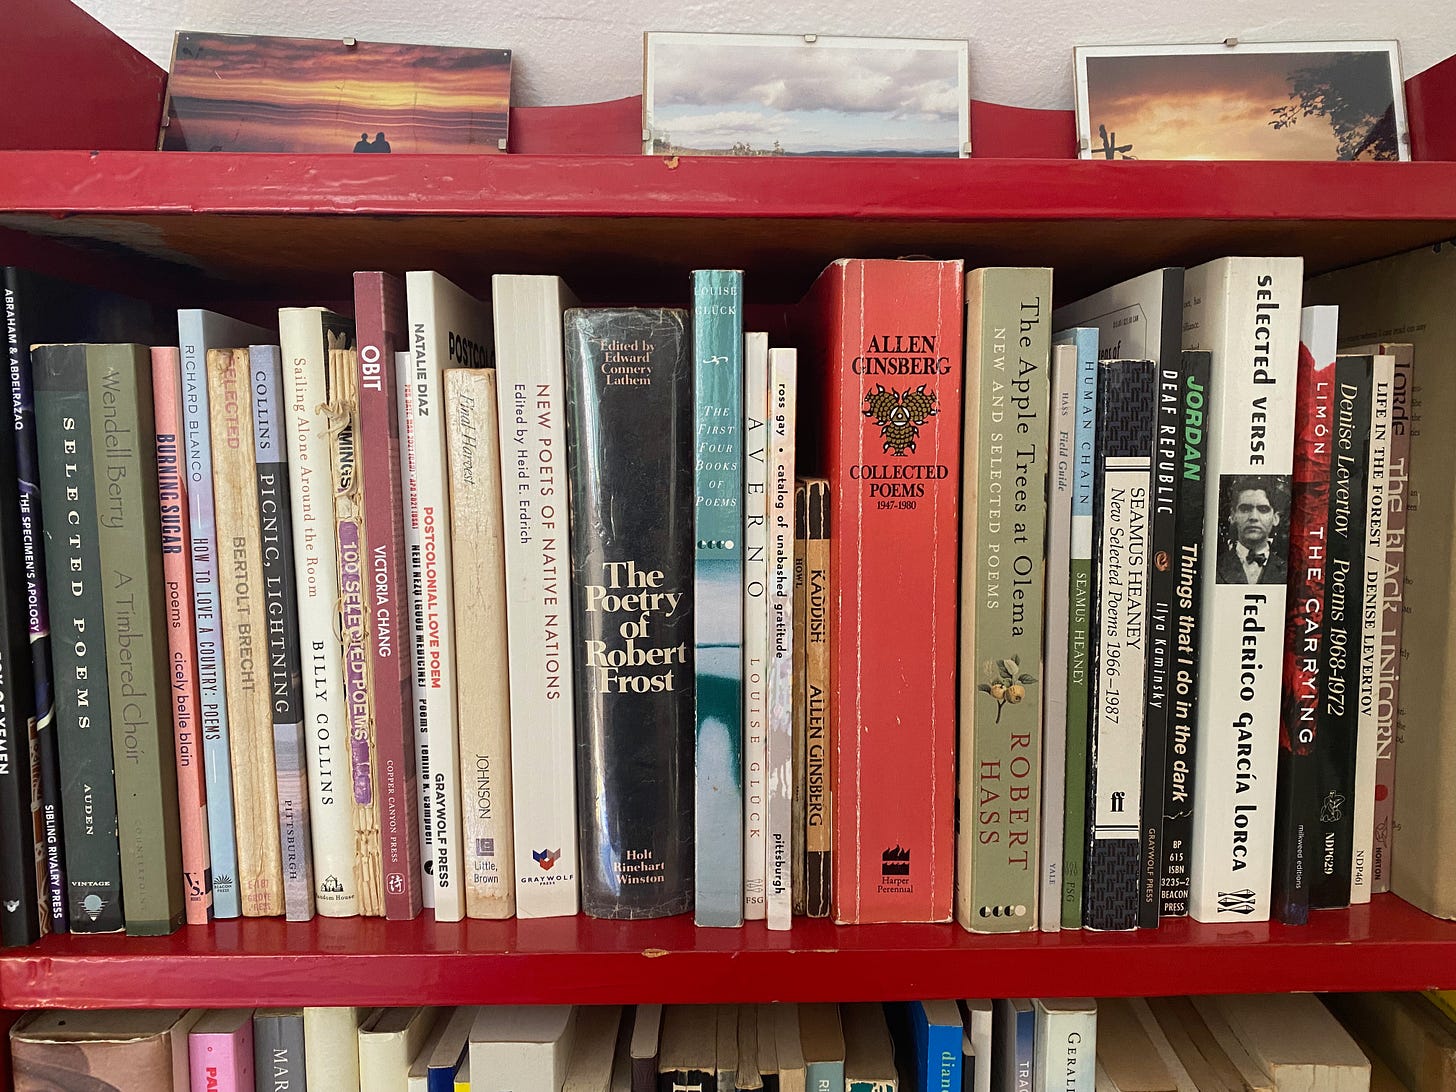 A closeup of a shelf of poetry books, including several large volumes of Robert Frost, Allen Ginsberg, and Robert Hass, as well as some slimmer, newer collections. Three photos of sunsets and the sky sit on top of the shelf.